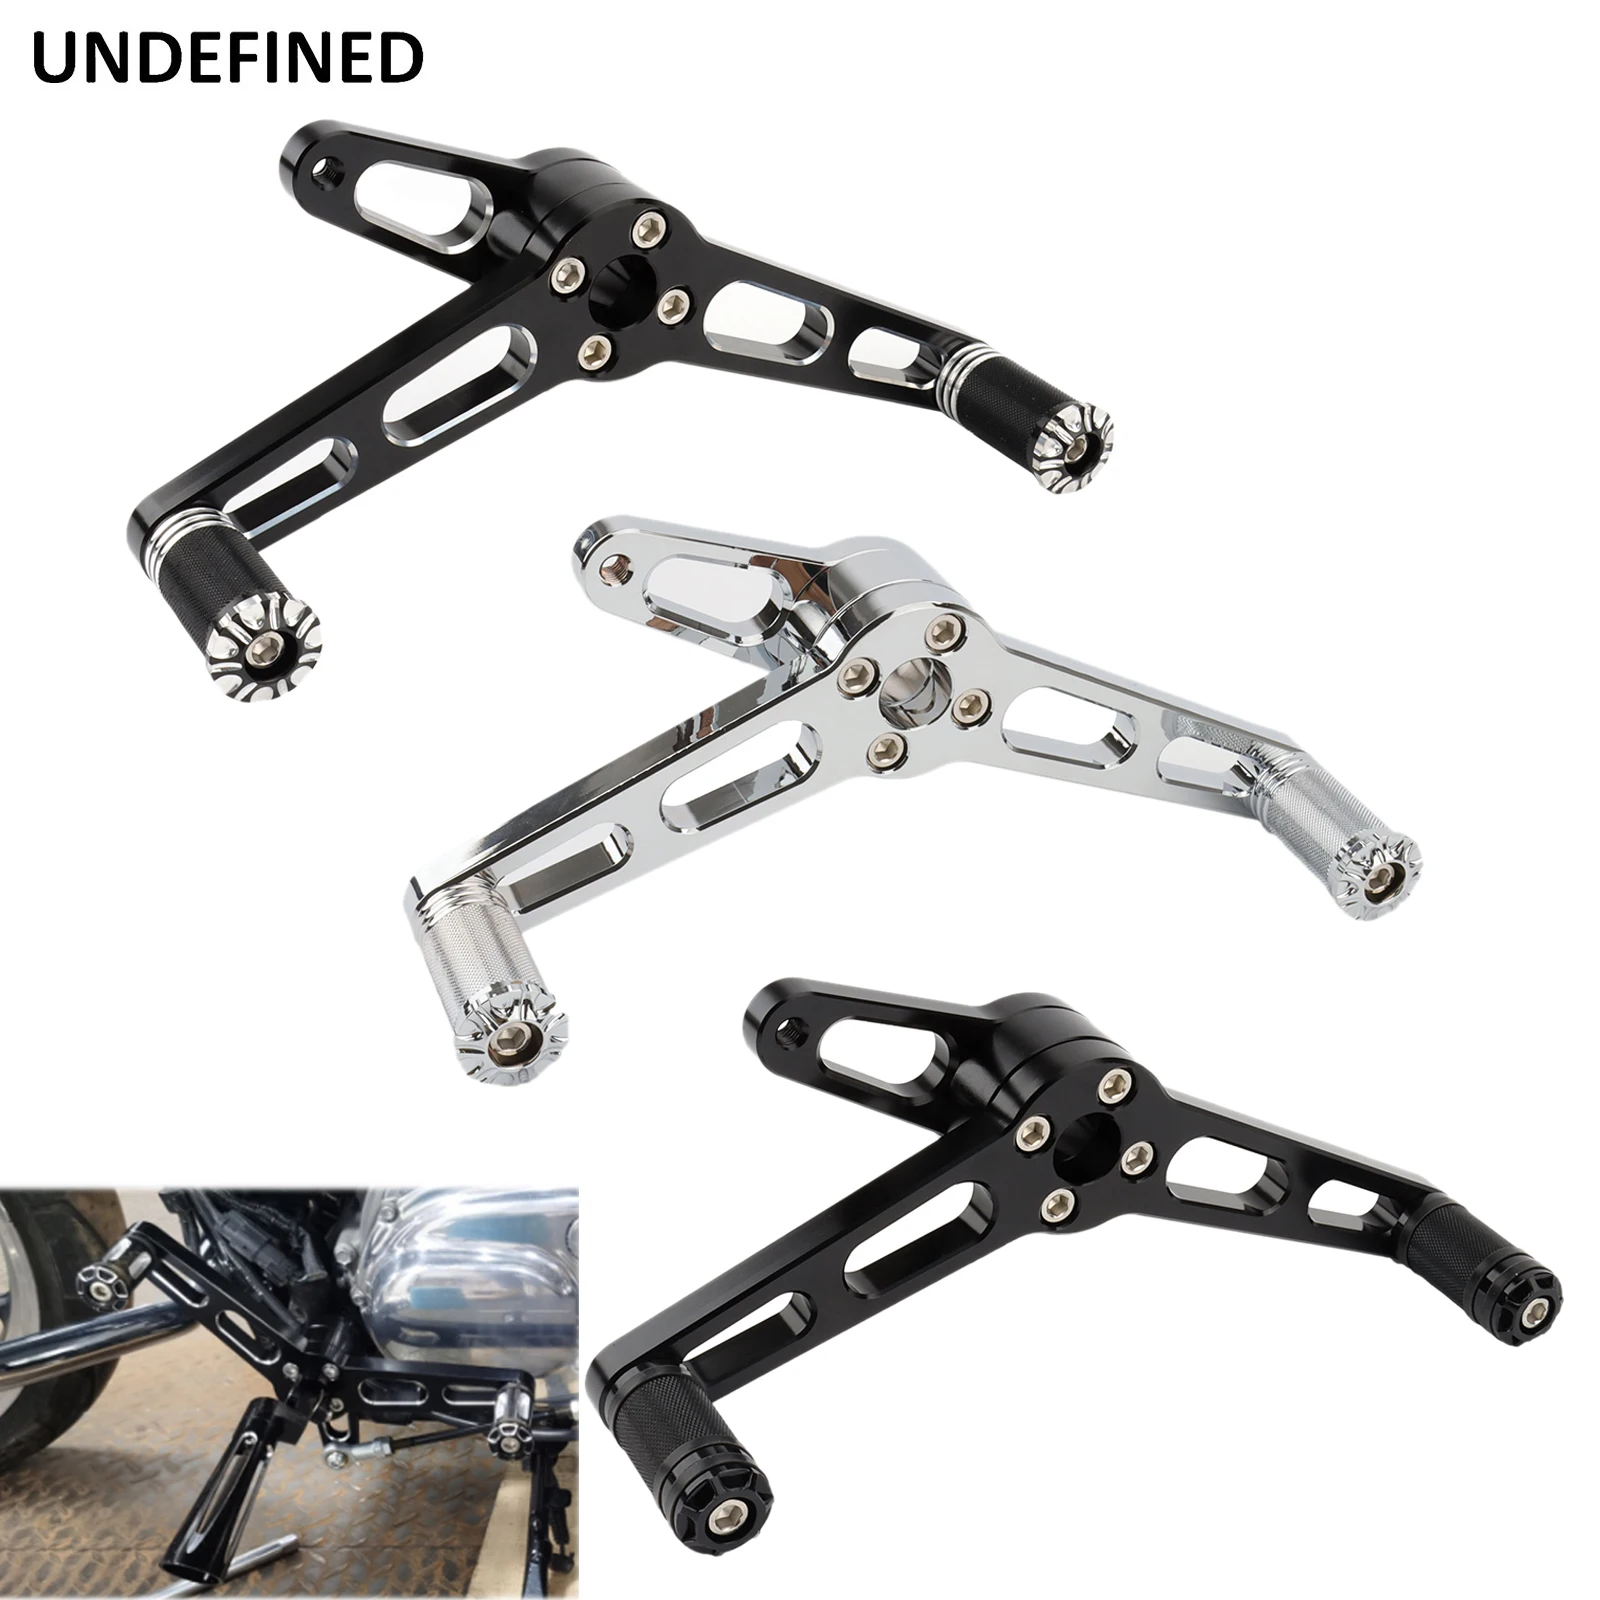 Motorcycle Forward Control Heel Toe Shift Lever Pedal Shifter Foot Pegs For - $73.40+